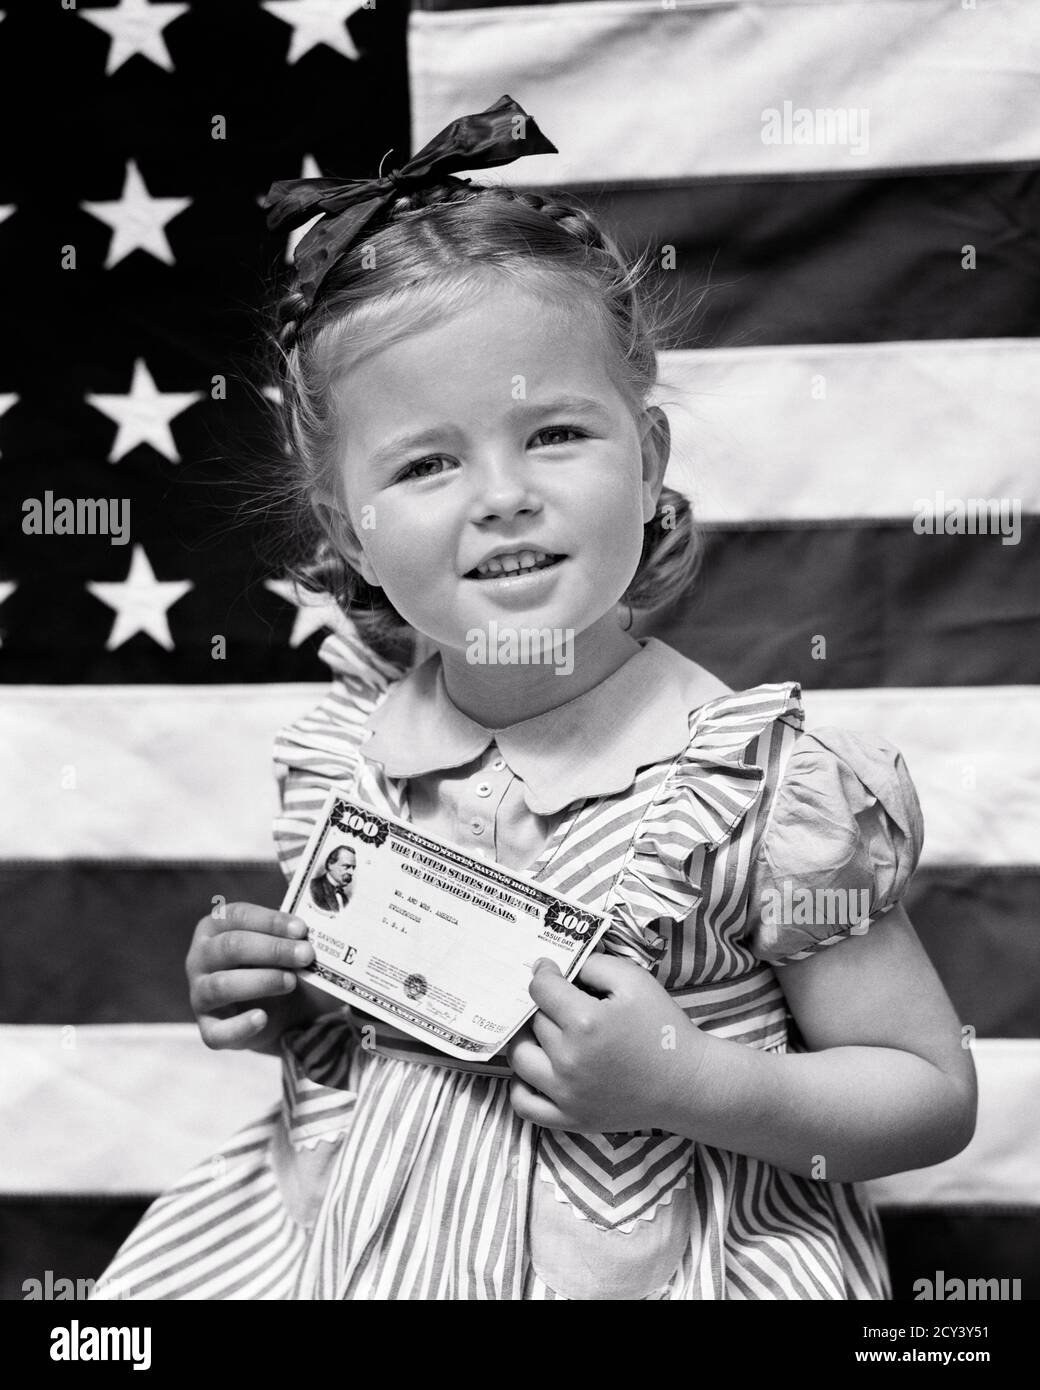 1940s WW2 SAVINGS BOND DRIVE SMILING APPEALING GIRL LOOKING AT CAMERA HOLDING $100 UNITES STATES SERIES E AMERICAN FLAG IN B/G - d2025 HAR001 HARS HISTORY CONFLICT FEMALES WW2 STUDIO SHOT RURAL HALF-LENGTH INSPIRATION CARING RISK CONFIDENCE B&W BOND EYE CONTACT FREEDOM SUCCESS HOME FRONT CHEERFUL STRENGTH VICTORY STRATEGY CHOICE EFFORT POWERFUL WORLD WARS PRIDE WORLD WAR WORLD WAR TWO WORLD WAR II IN OPPORTUNITY POLITICS SMILES CONCEPTUAL JOYFUL SUPPORT WORLD WAR 2 $100 E JUVENILES SERIES APPEALING BLACK AND WHITE CAUCASIAN ETHNICITY HAR001 OLD FASHIONED Stock Photo